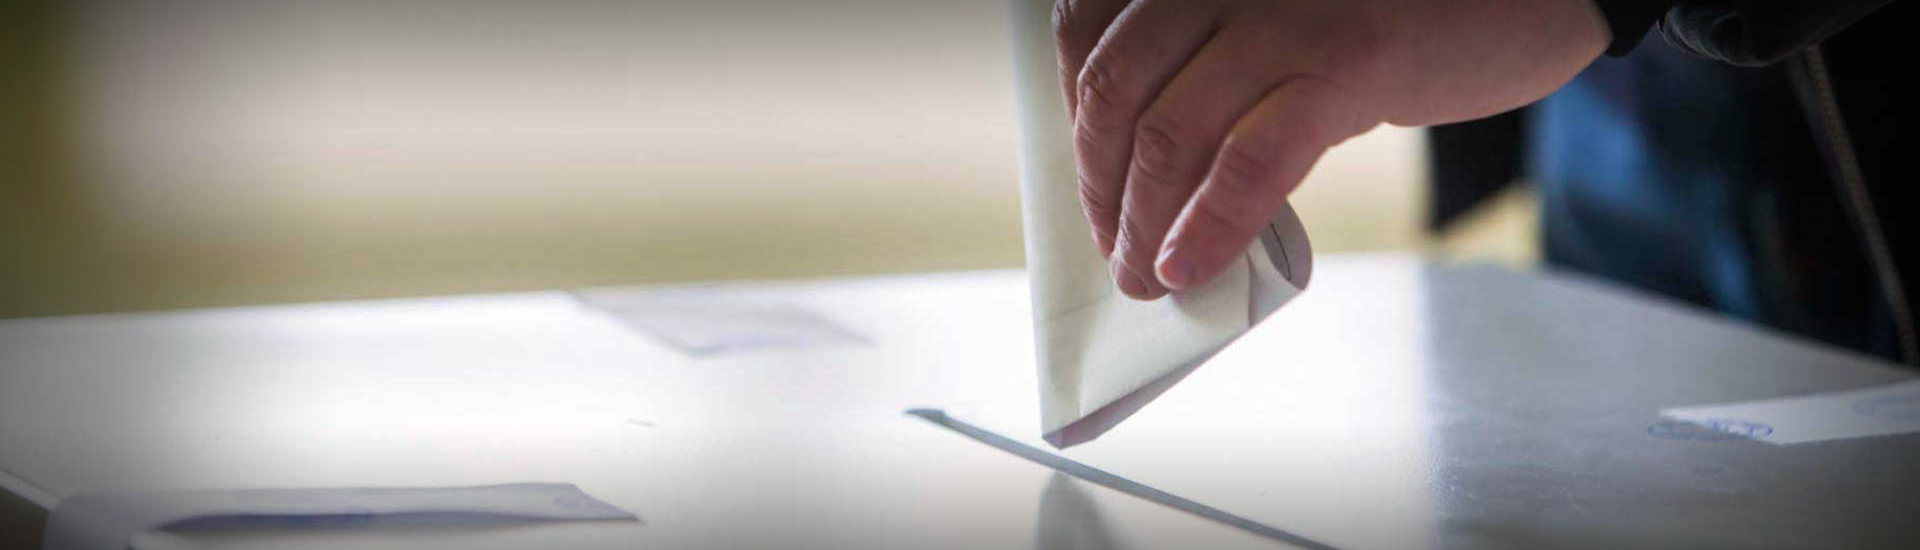 Voting Box ballot being inserted